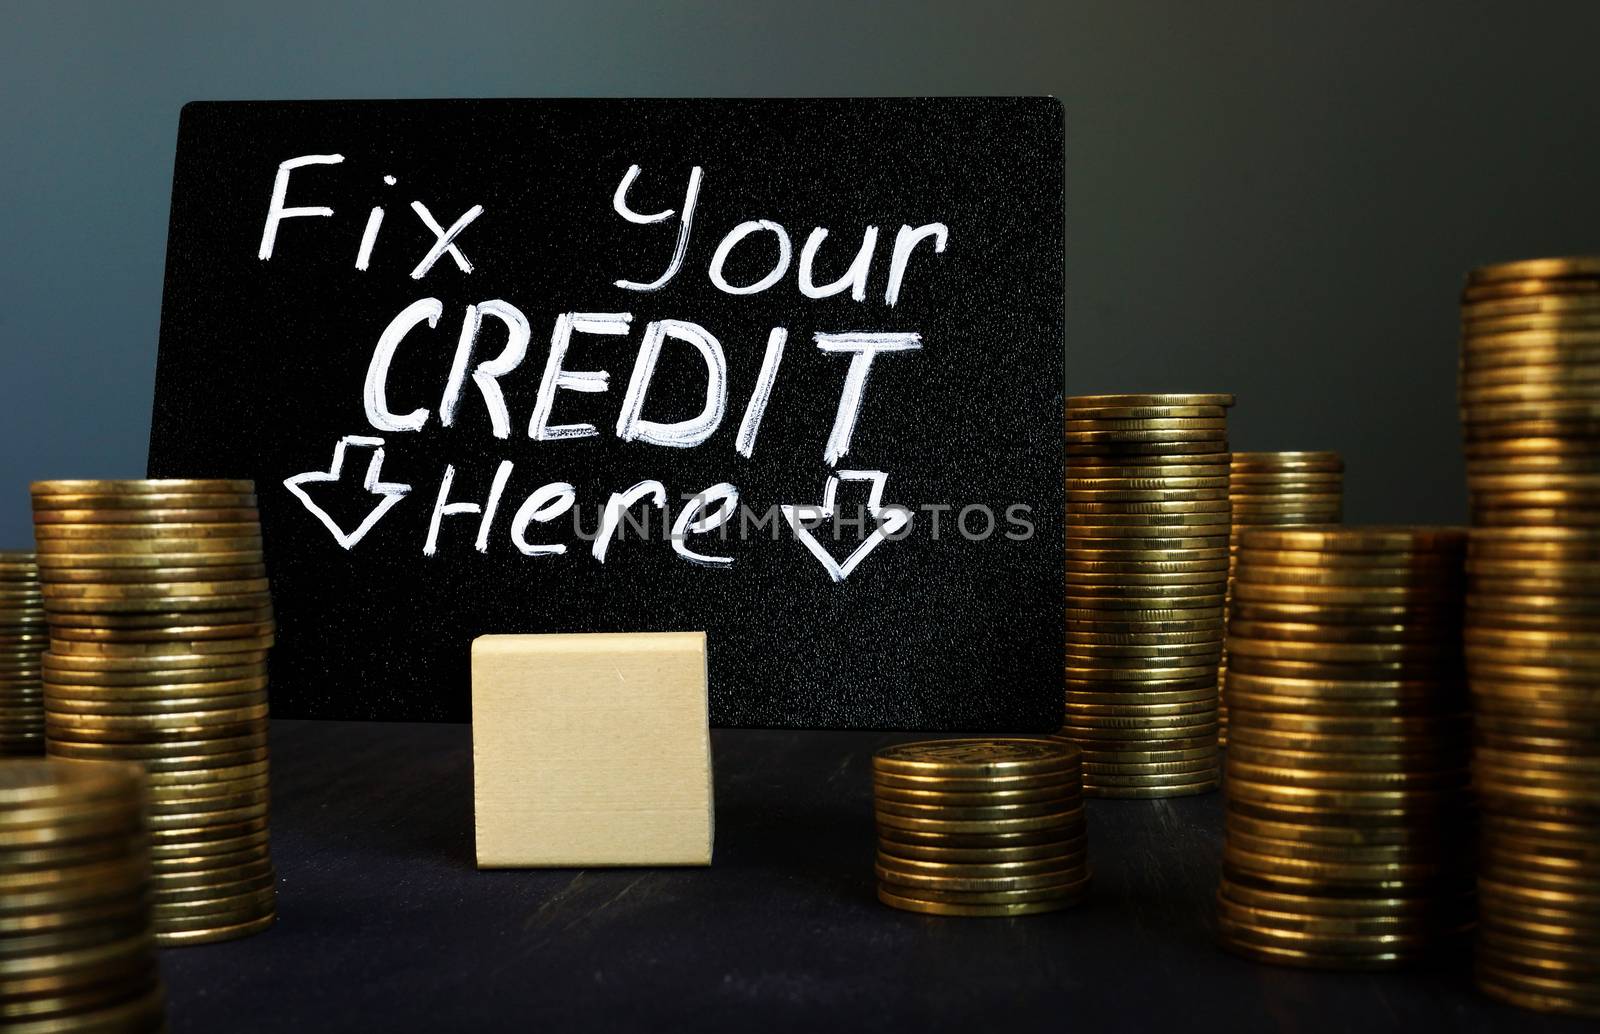 Fix your credit here handwritten sign and money.